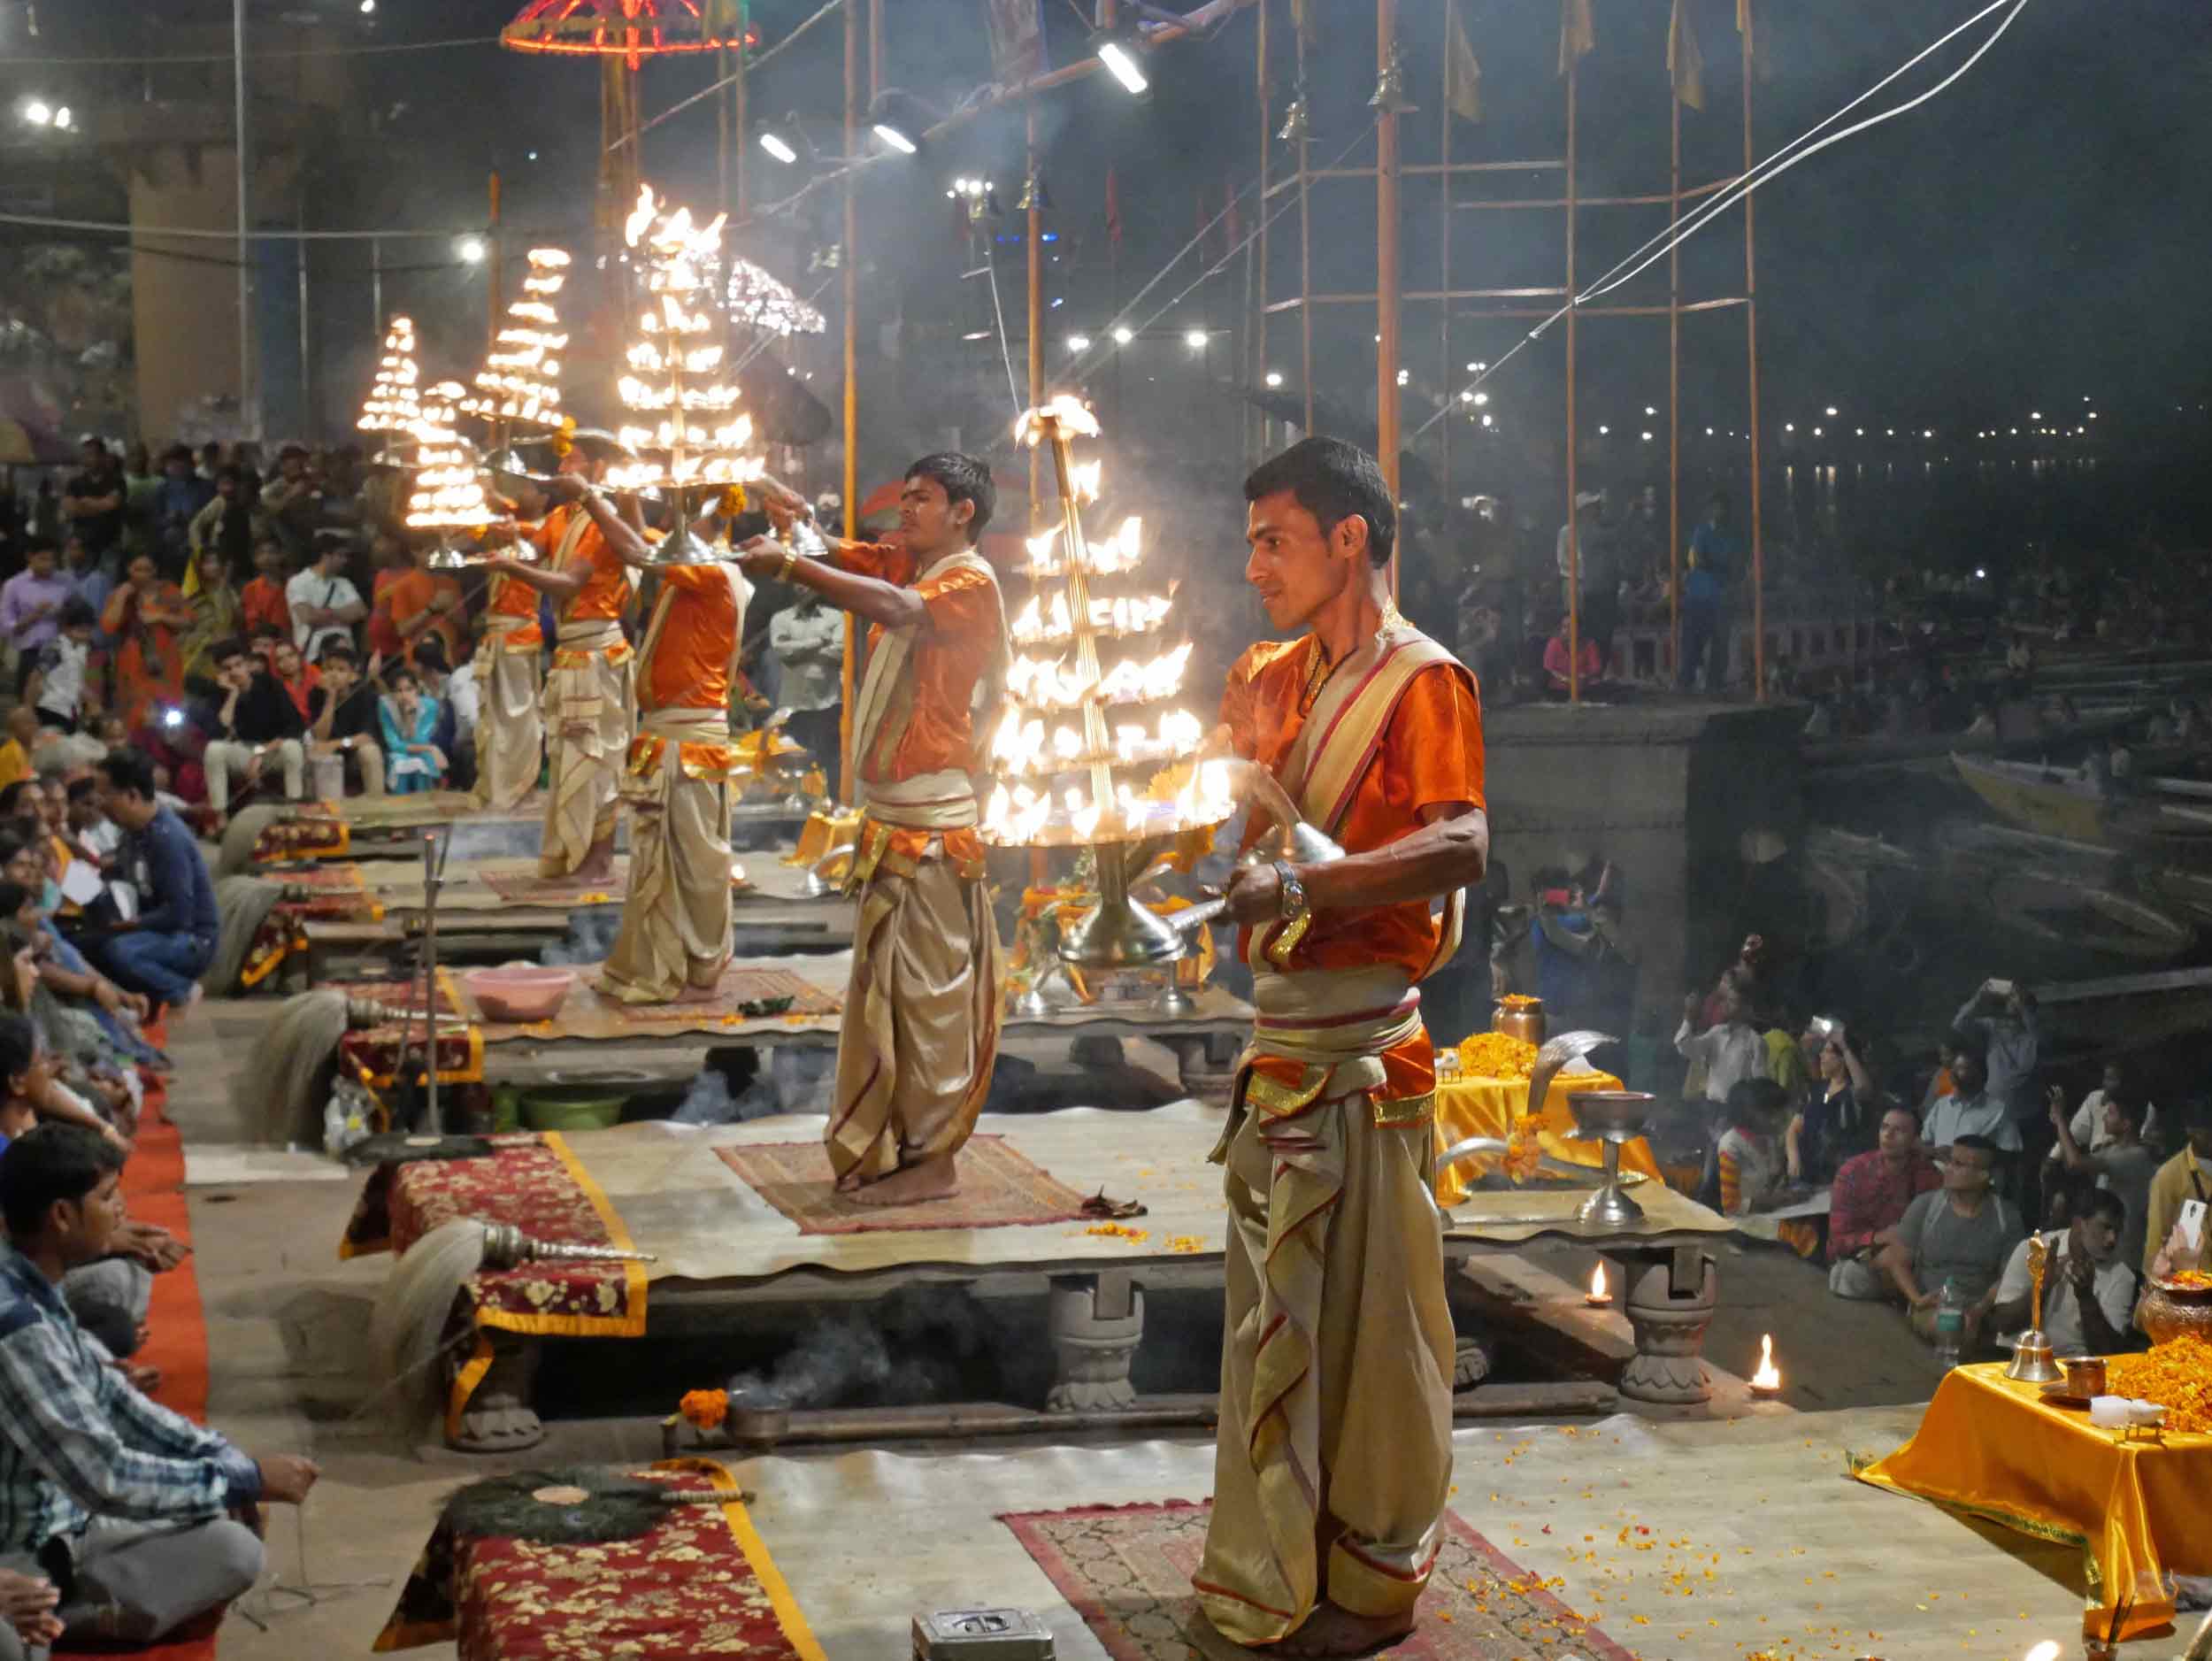  The spectacular Hindu ritual called the 'Ganga Aarti' held at the banks of the River Ganges. 